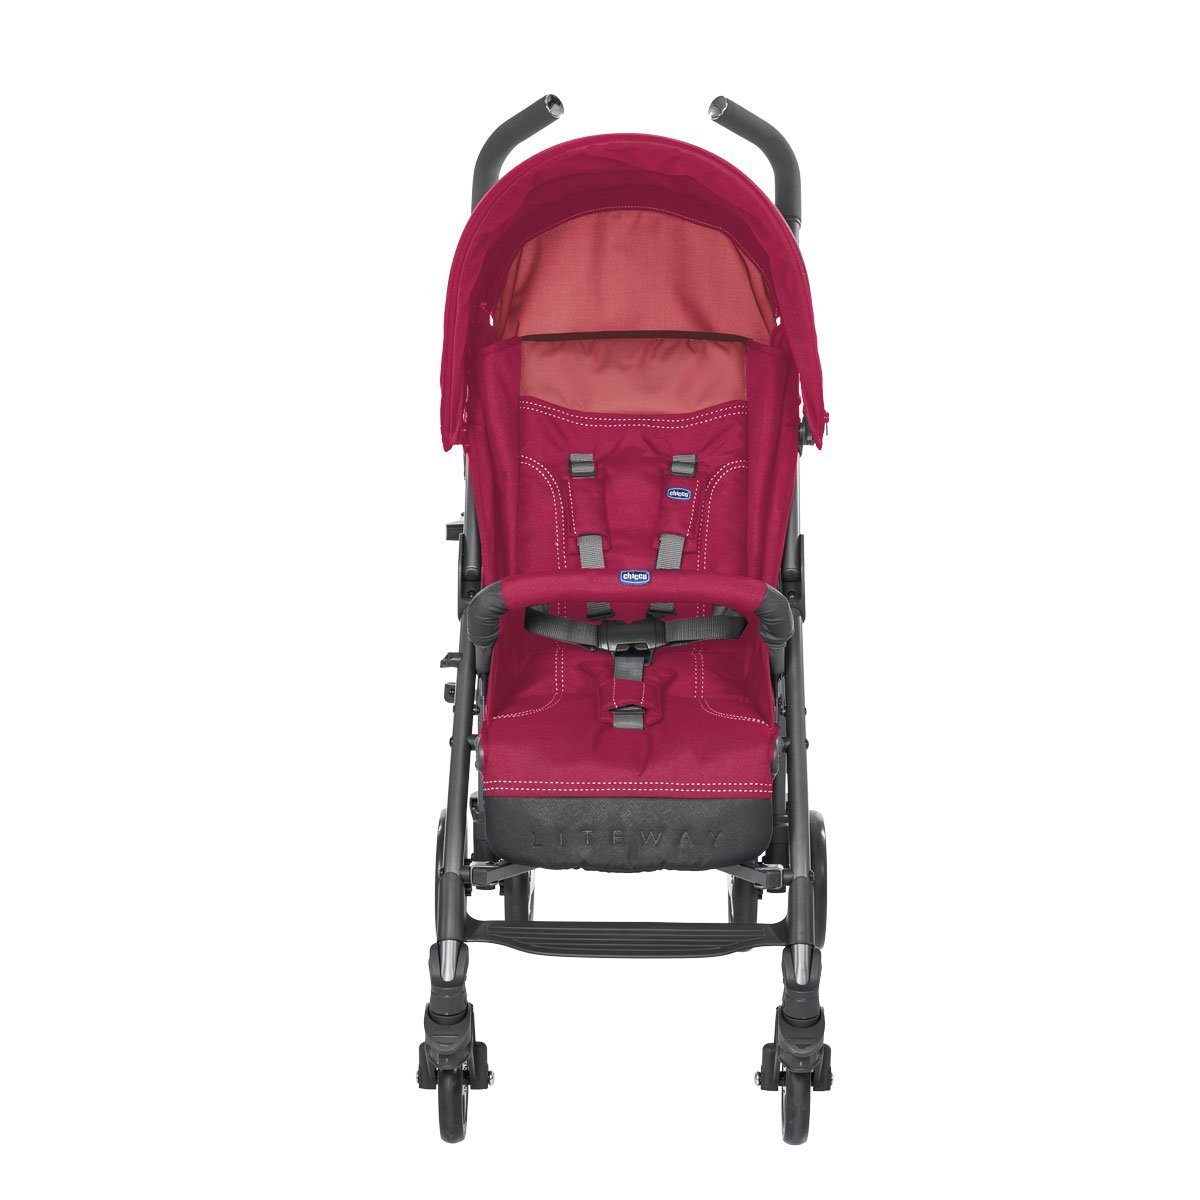 Carriola Liteway Complete Red Berry Chicco